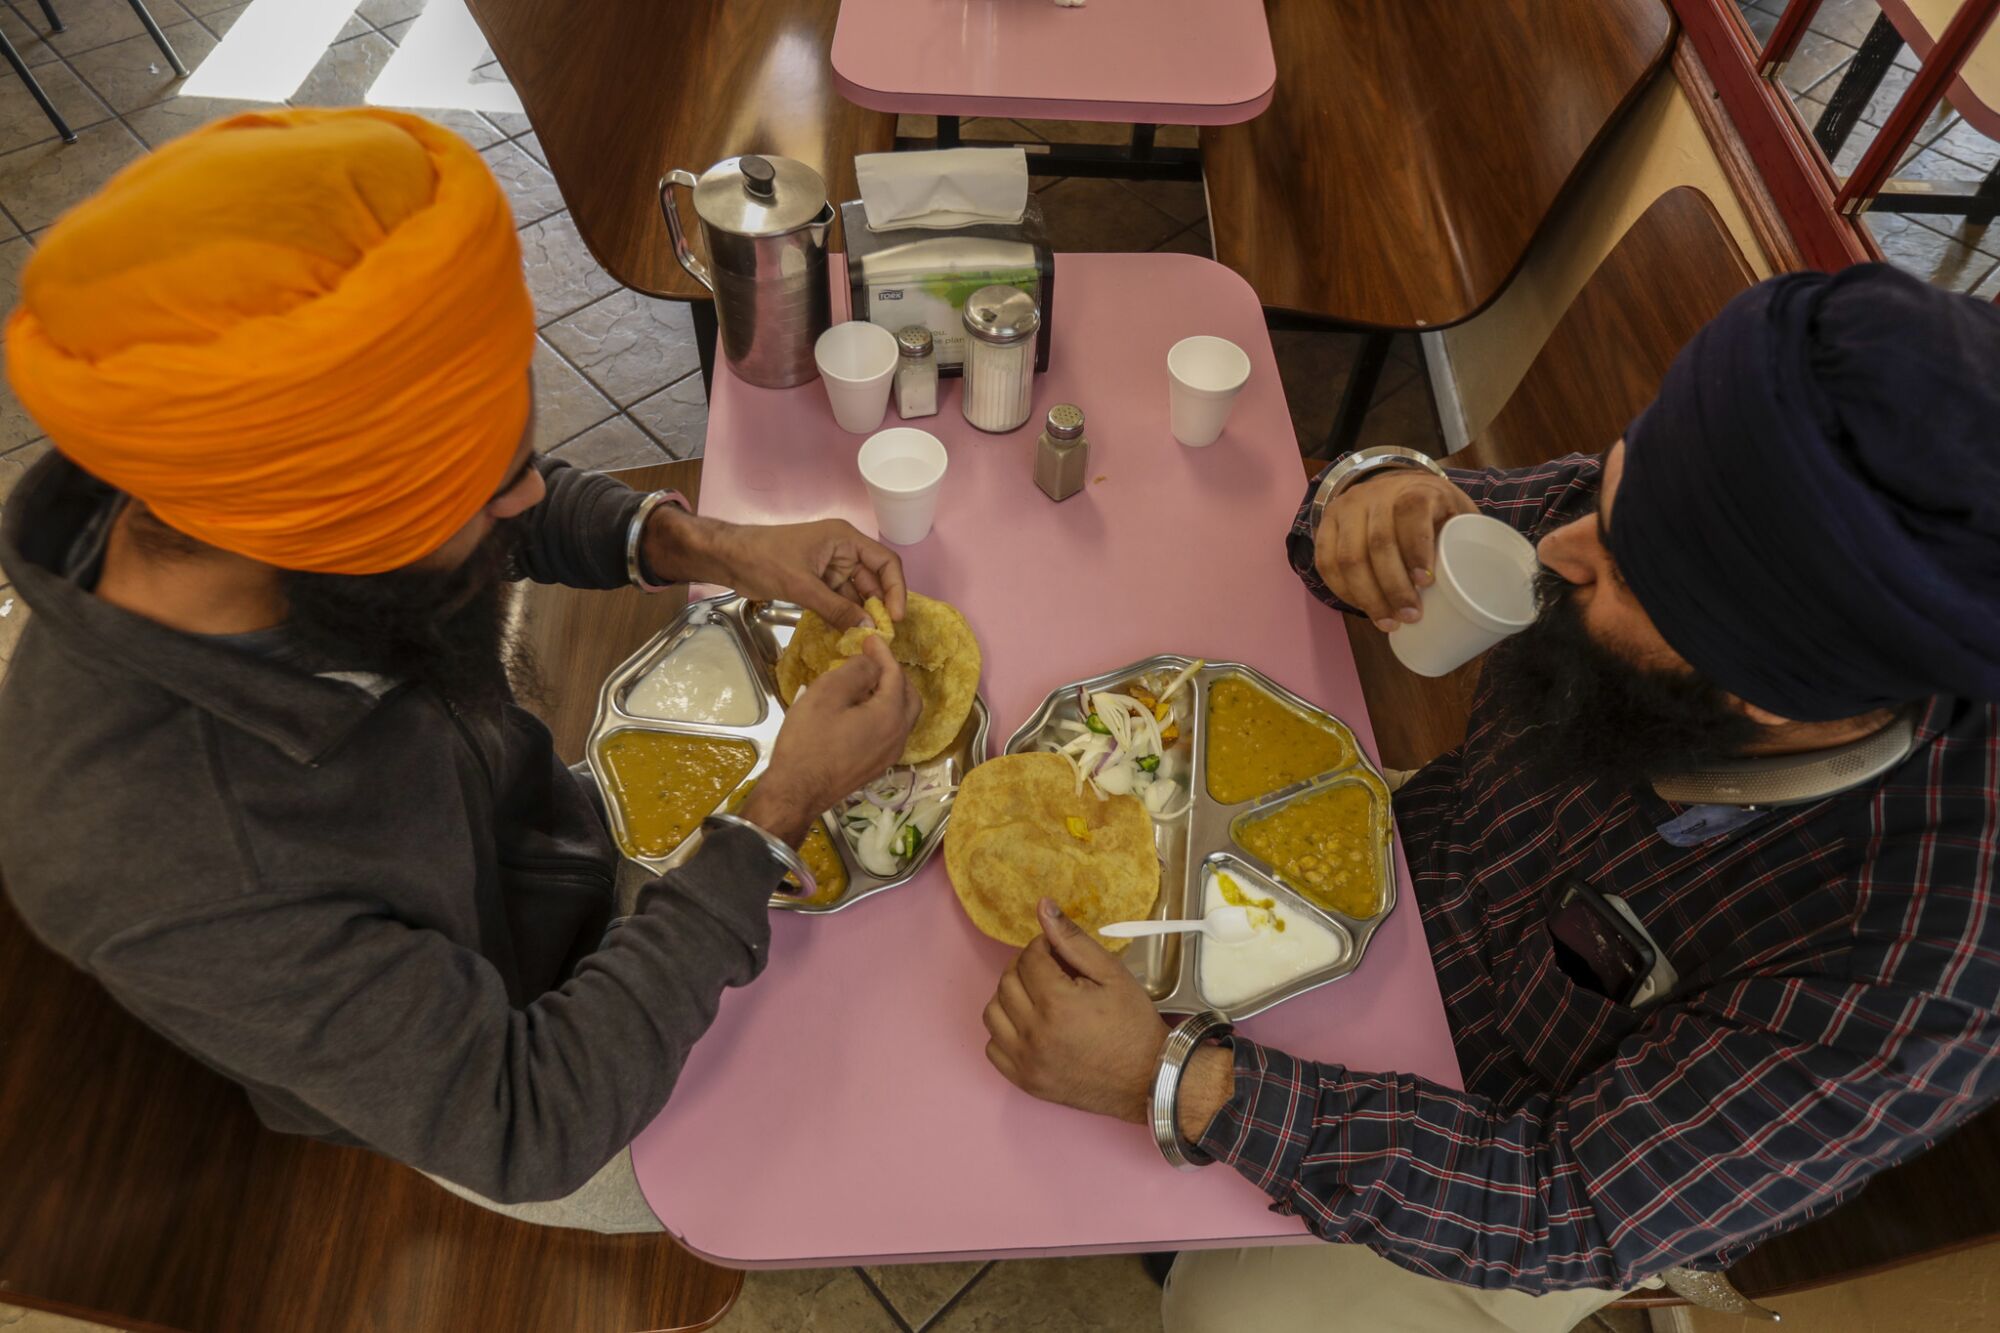 Two Sikh truckers dine.